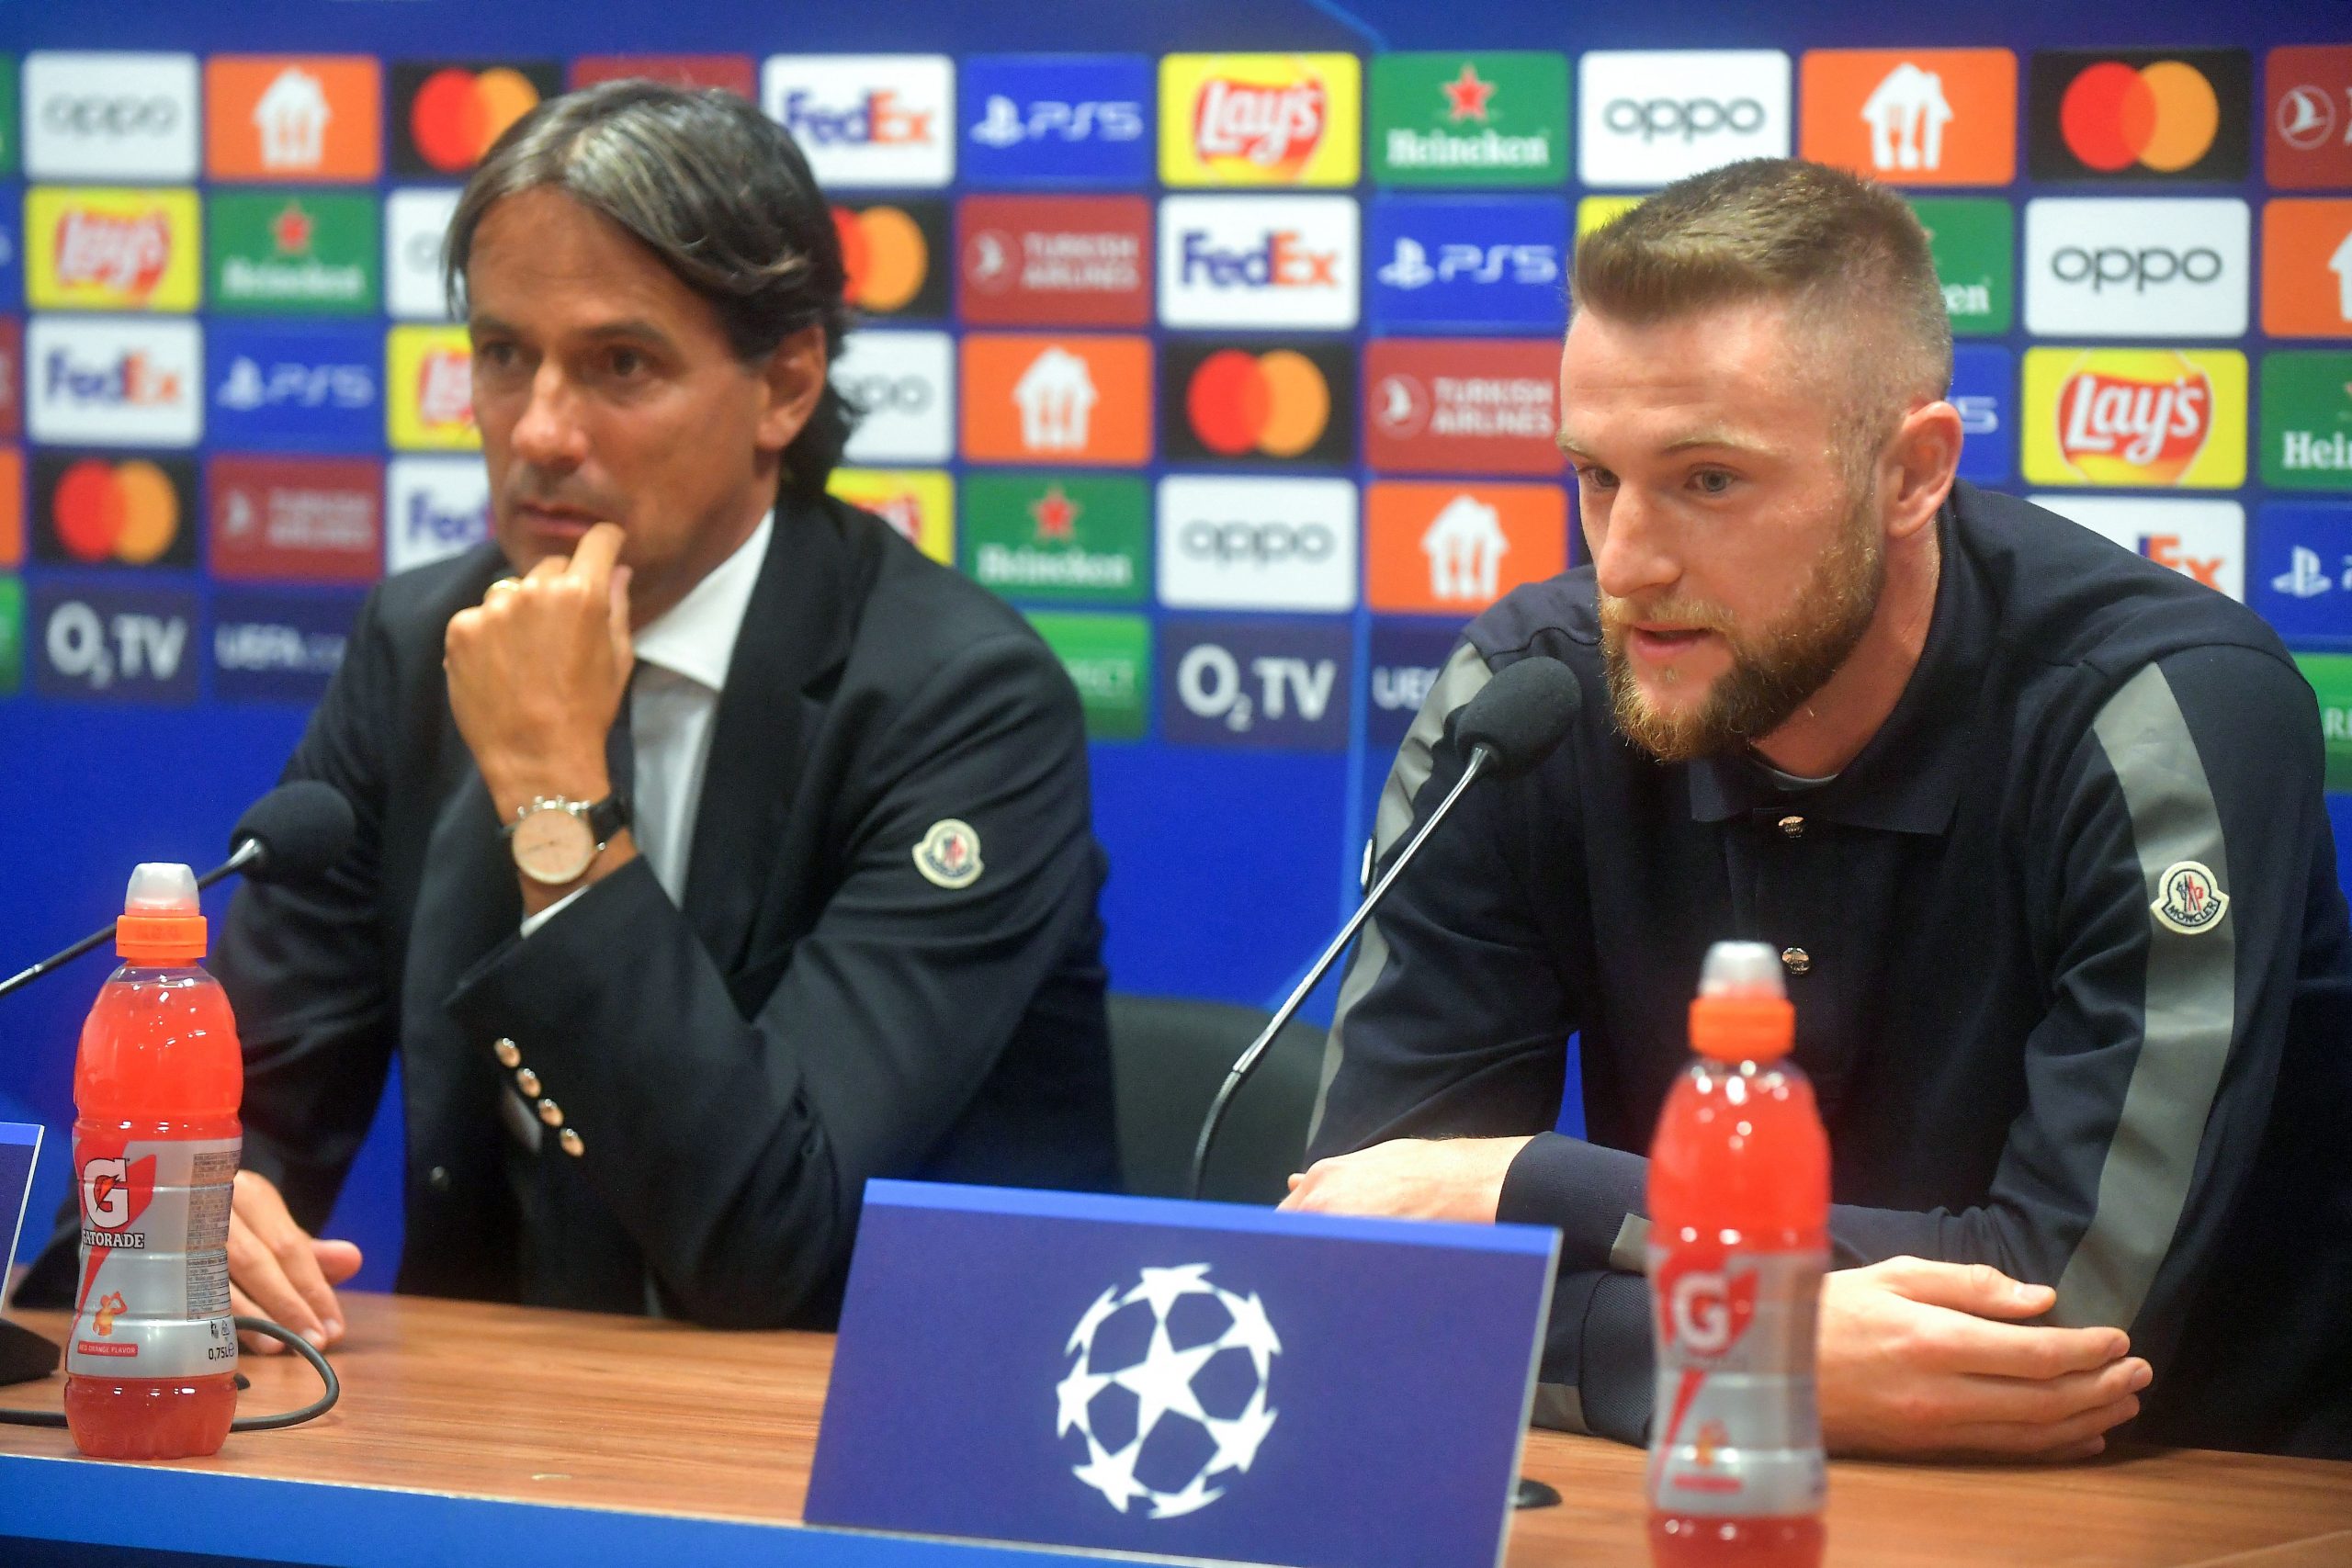 Inter Milan's Slovakian defender Milan Skriniar (R) and Inter Milan's Italian head coach Simone Inzaghi address a press conference in Plzen on September 12, 2022, on the eve of the UEFA Champions League Group C second leg football match between FC Viktoria Plzen and Inter Milan. (Photo by Michal Cizek / AFP) (Photo by MICHAL CIZEK/AFP via Getty Images)